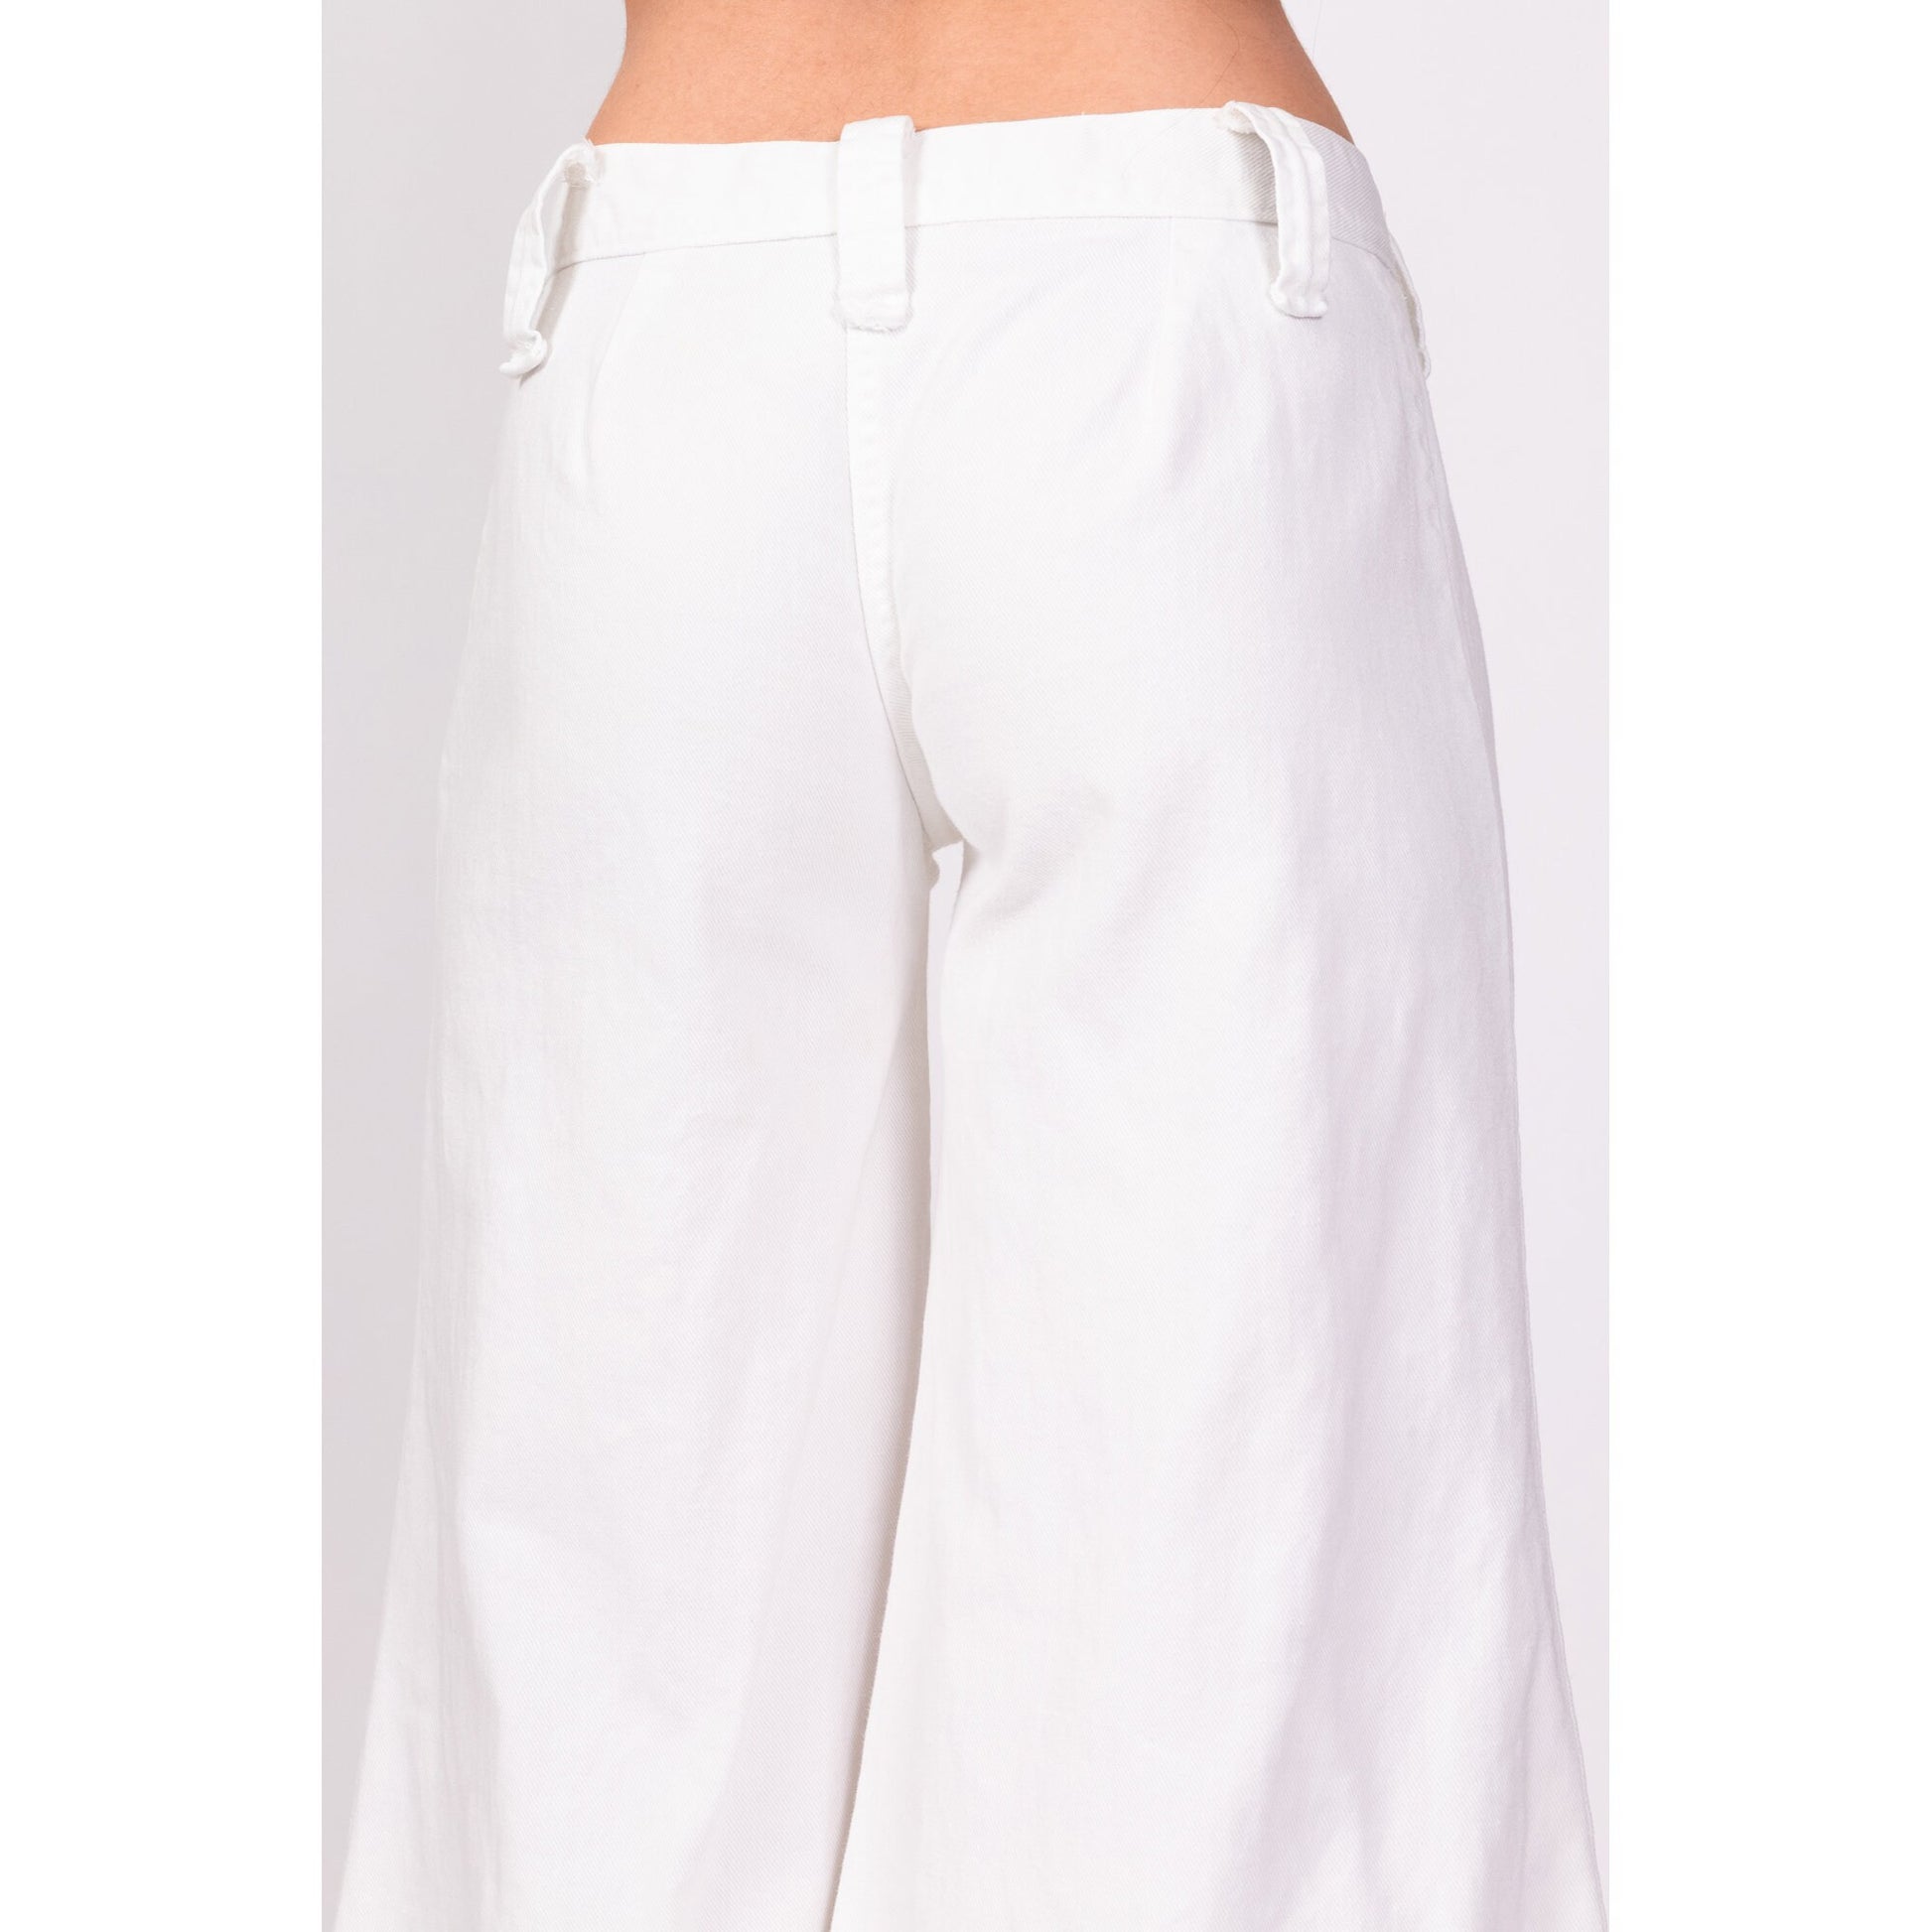 70s White Cotton Contrast Stitch Bell Bottoms - Men's Small